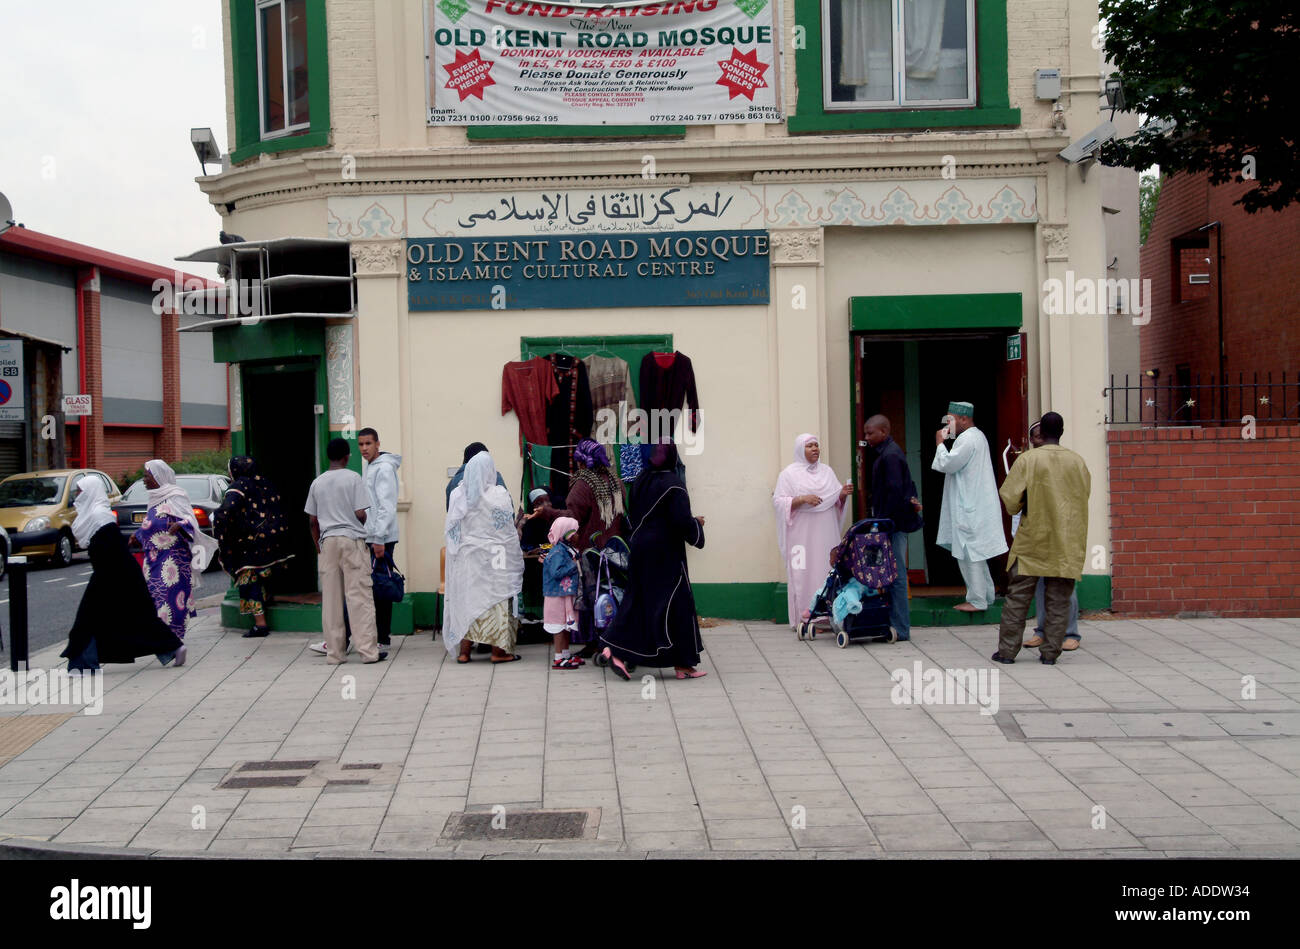 MUSLIM COMMUNITY IN FRONT OF OLD KENT ROAD MOSQUE CONVERSE WITH EACH OTHER LONDON JUNE 2005 Stock Photo